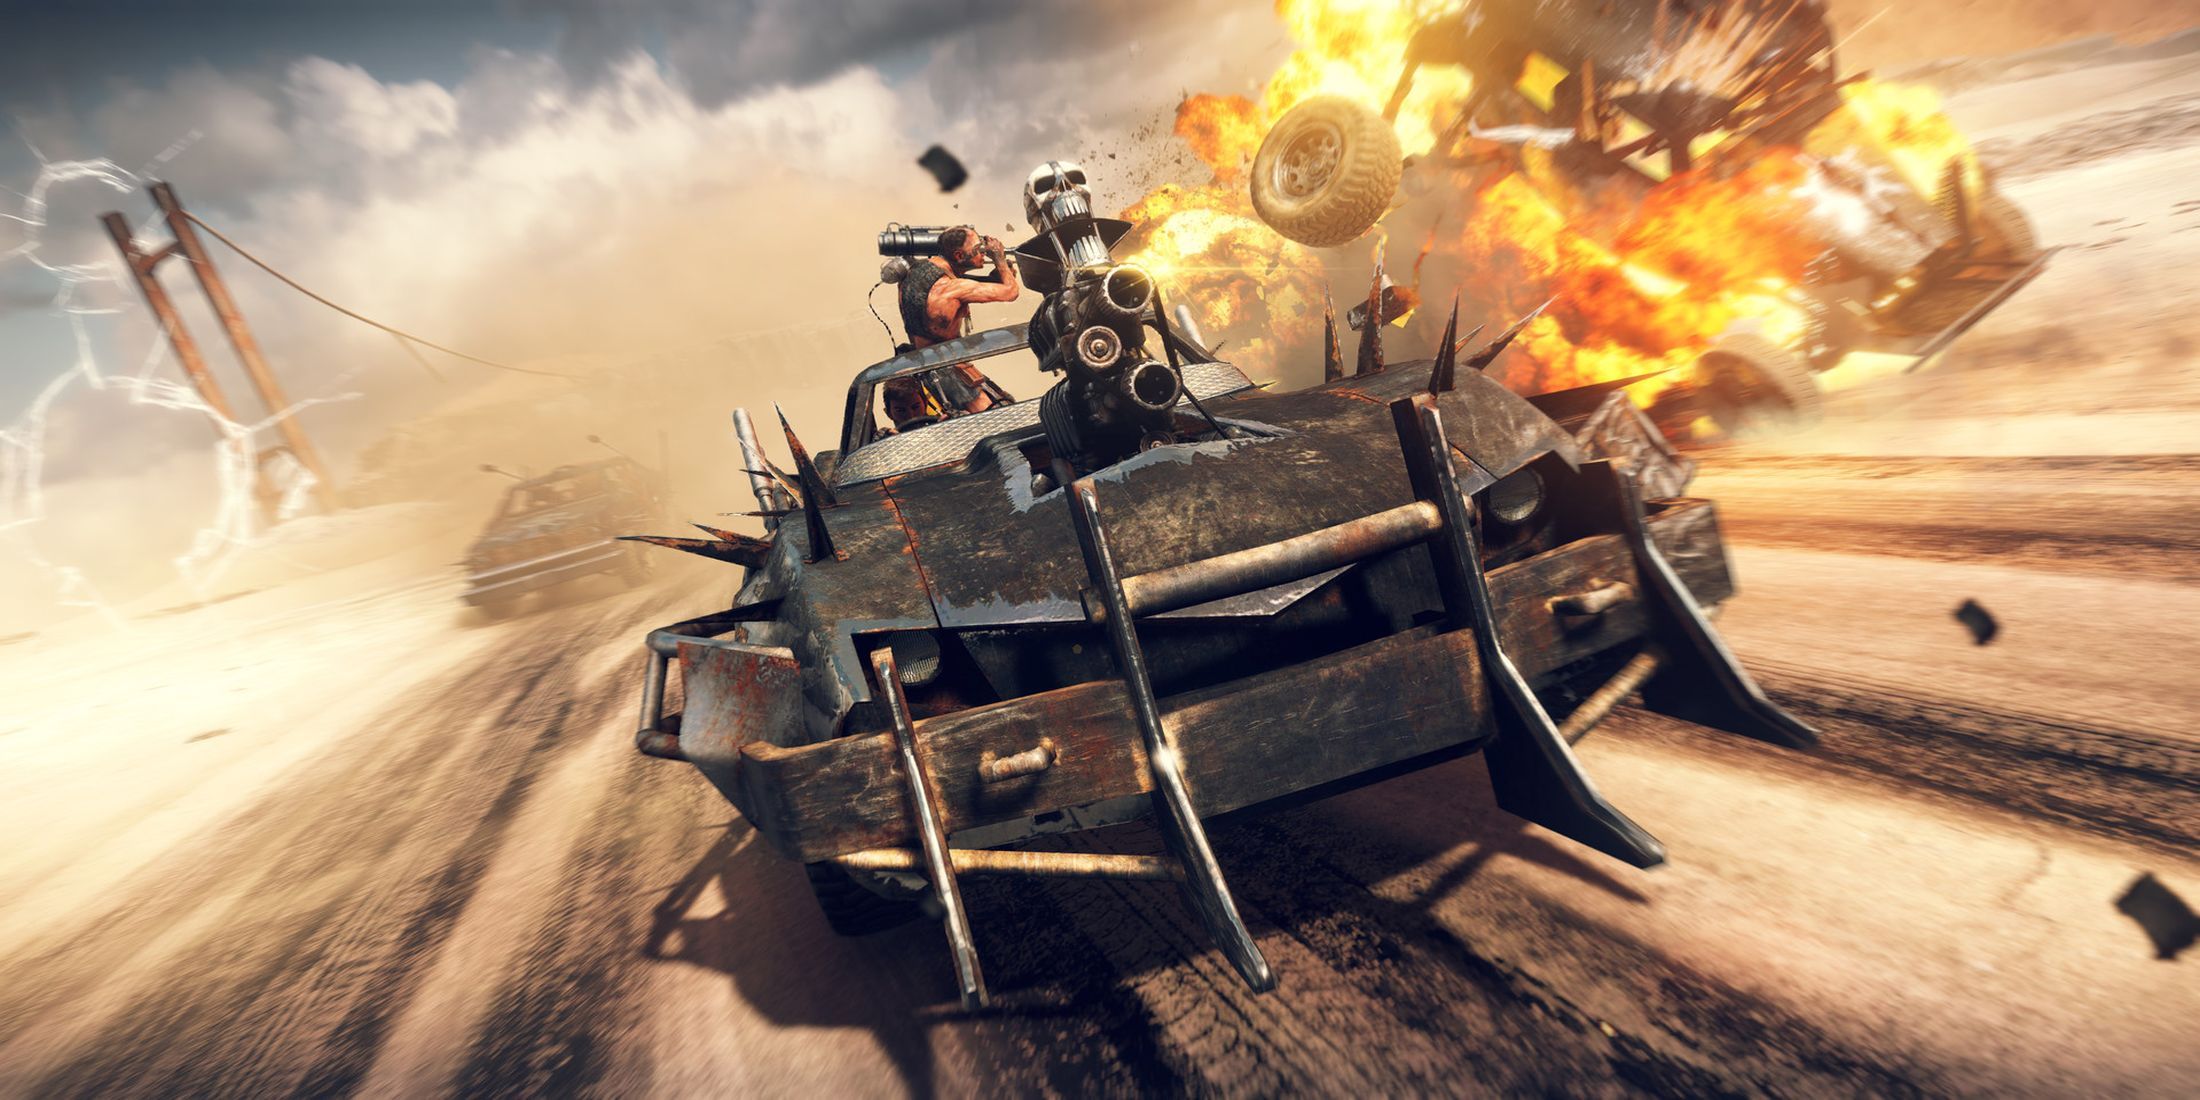 mad max 2015 game car fight explosion